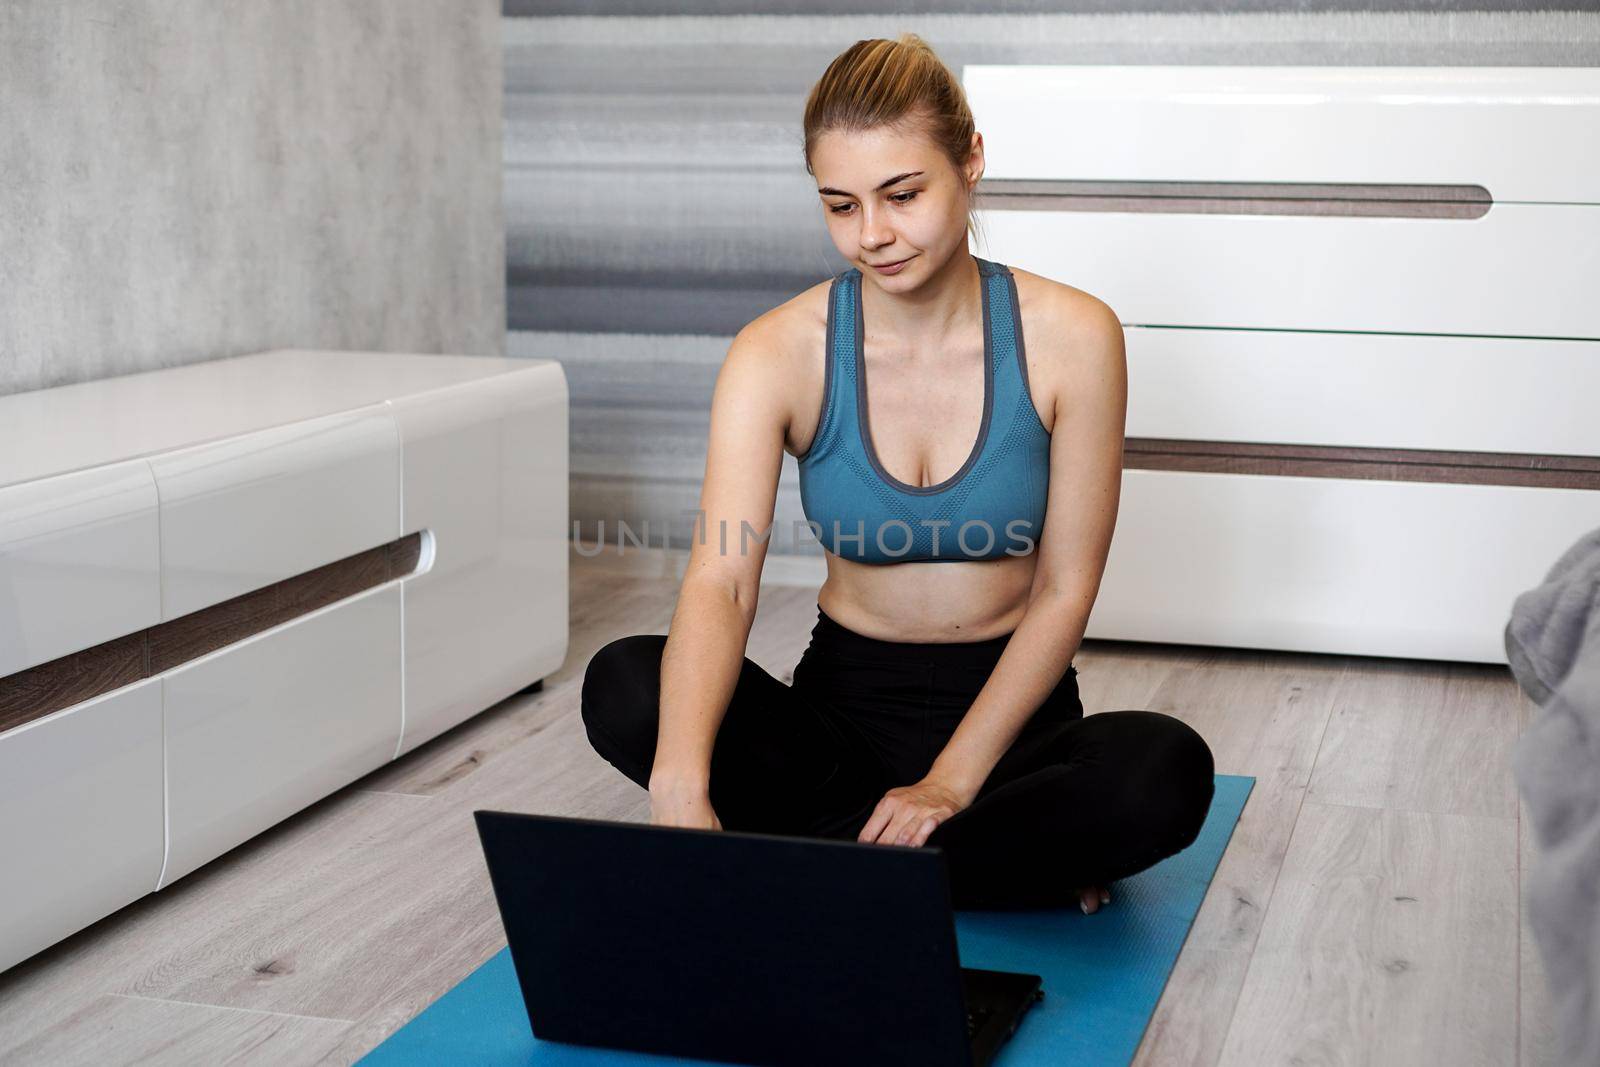 Girl training at home and watching videos on laptop before starting, training in living room